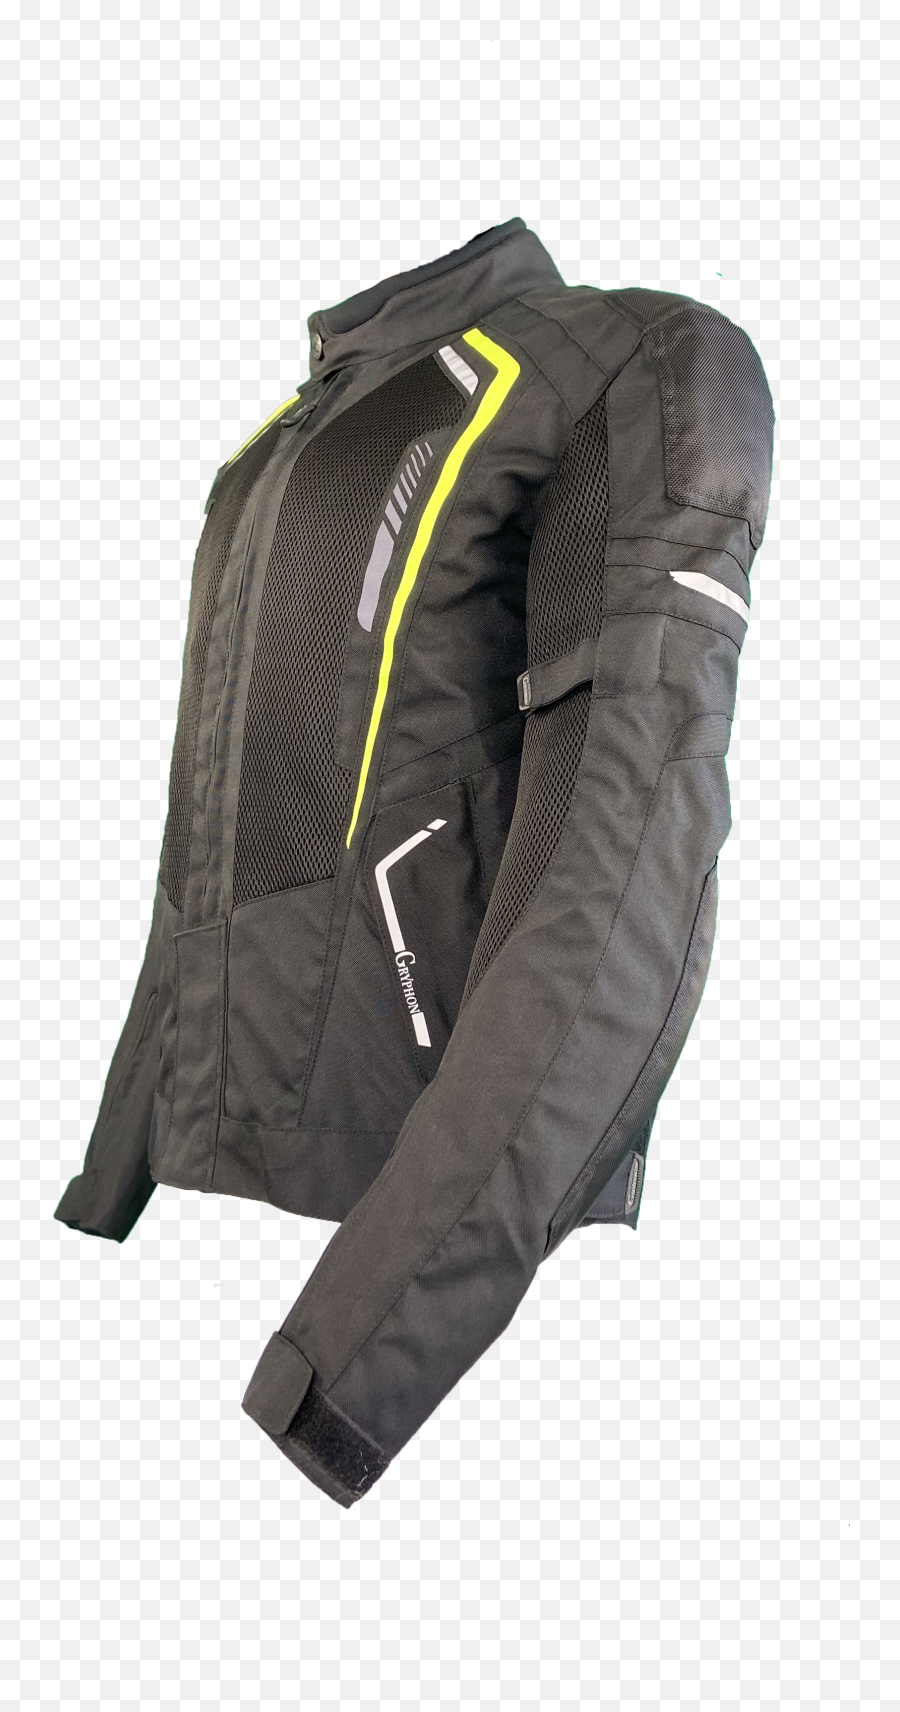 Torque Menu0027s Motorcycle Jacket For Transition Weather - Motorcycle Jackets Png,Icon Armor Jacket